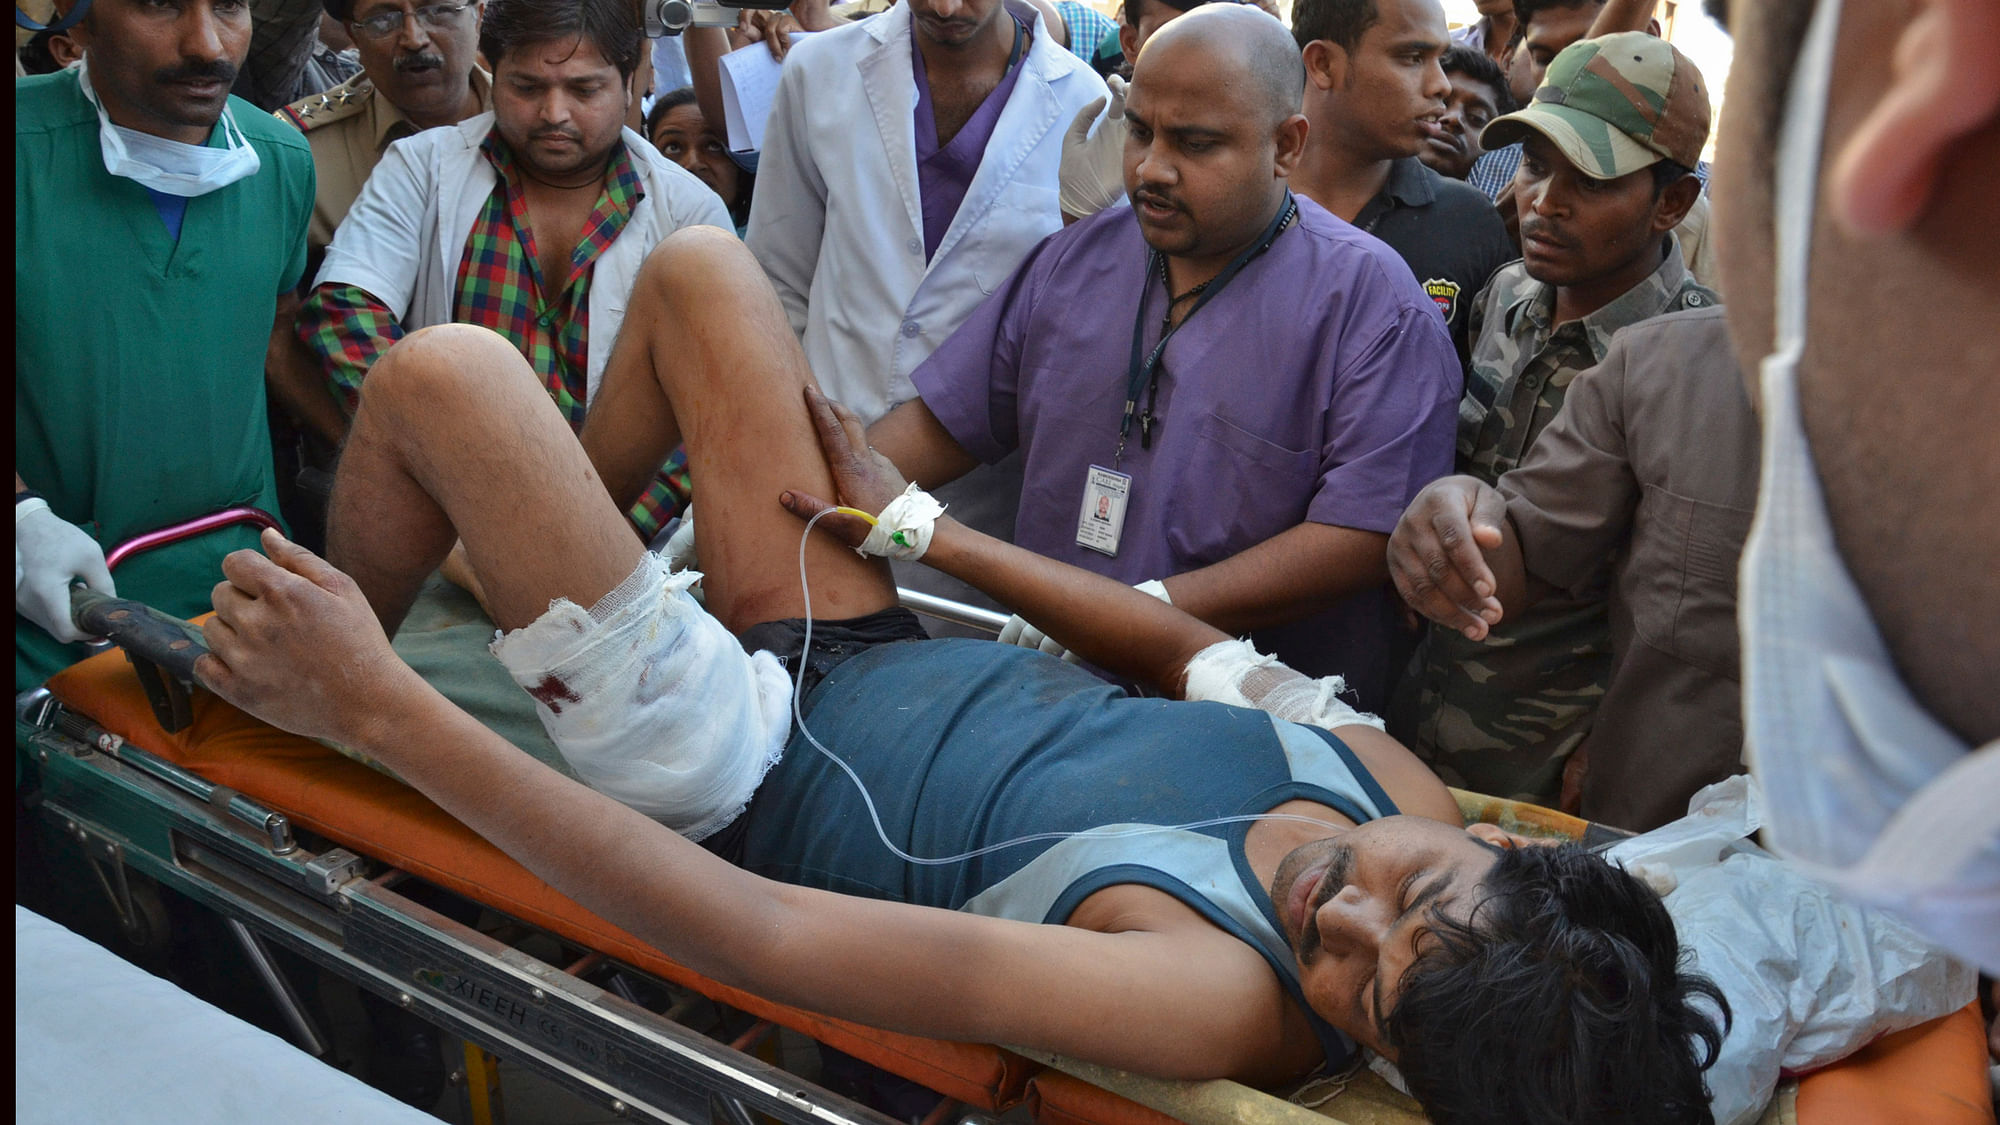 An injured Indian Central Reserve Police Force (CRPF) personnel taken to a hospital in Raipur, Chhattisgarh, March, 2014. (Photo: Reuters)